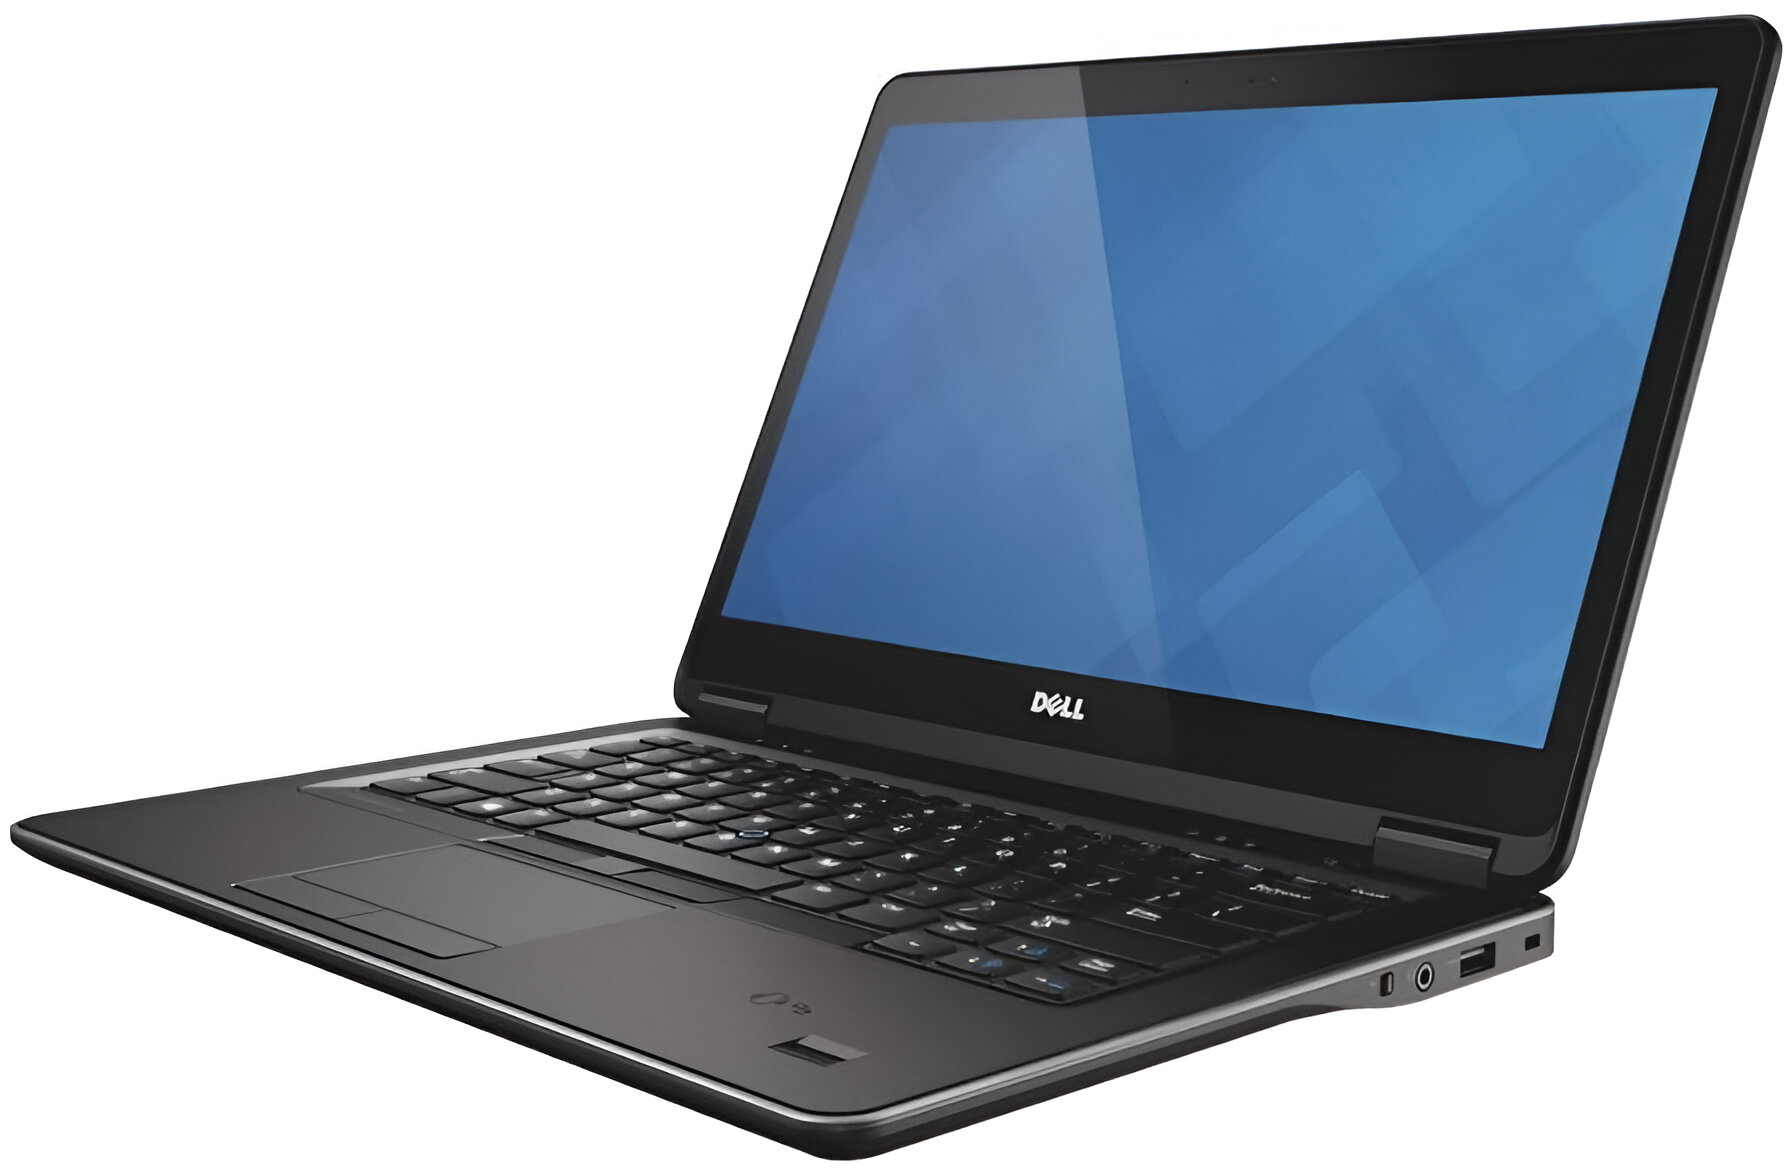 Dell Latitude E7440 14 Ultrabook – What Is The Weight